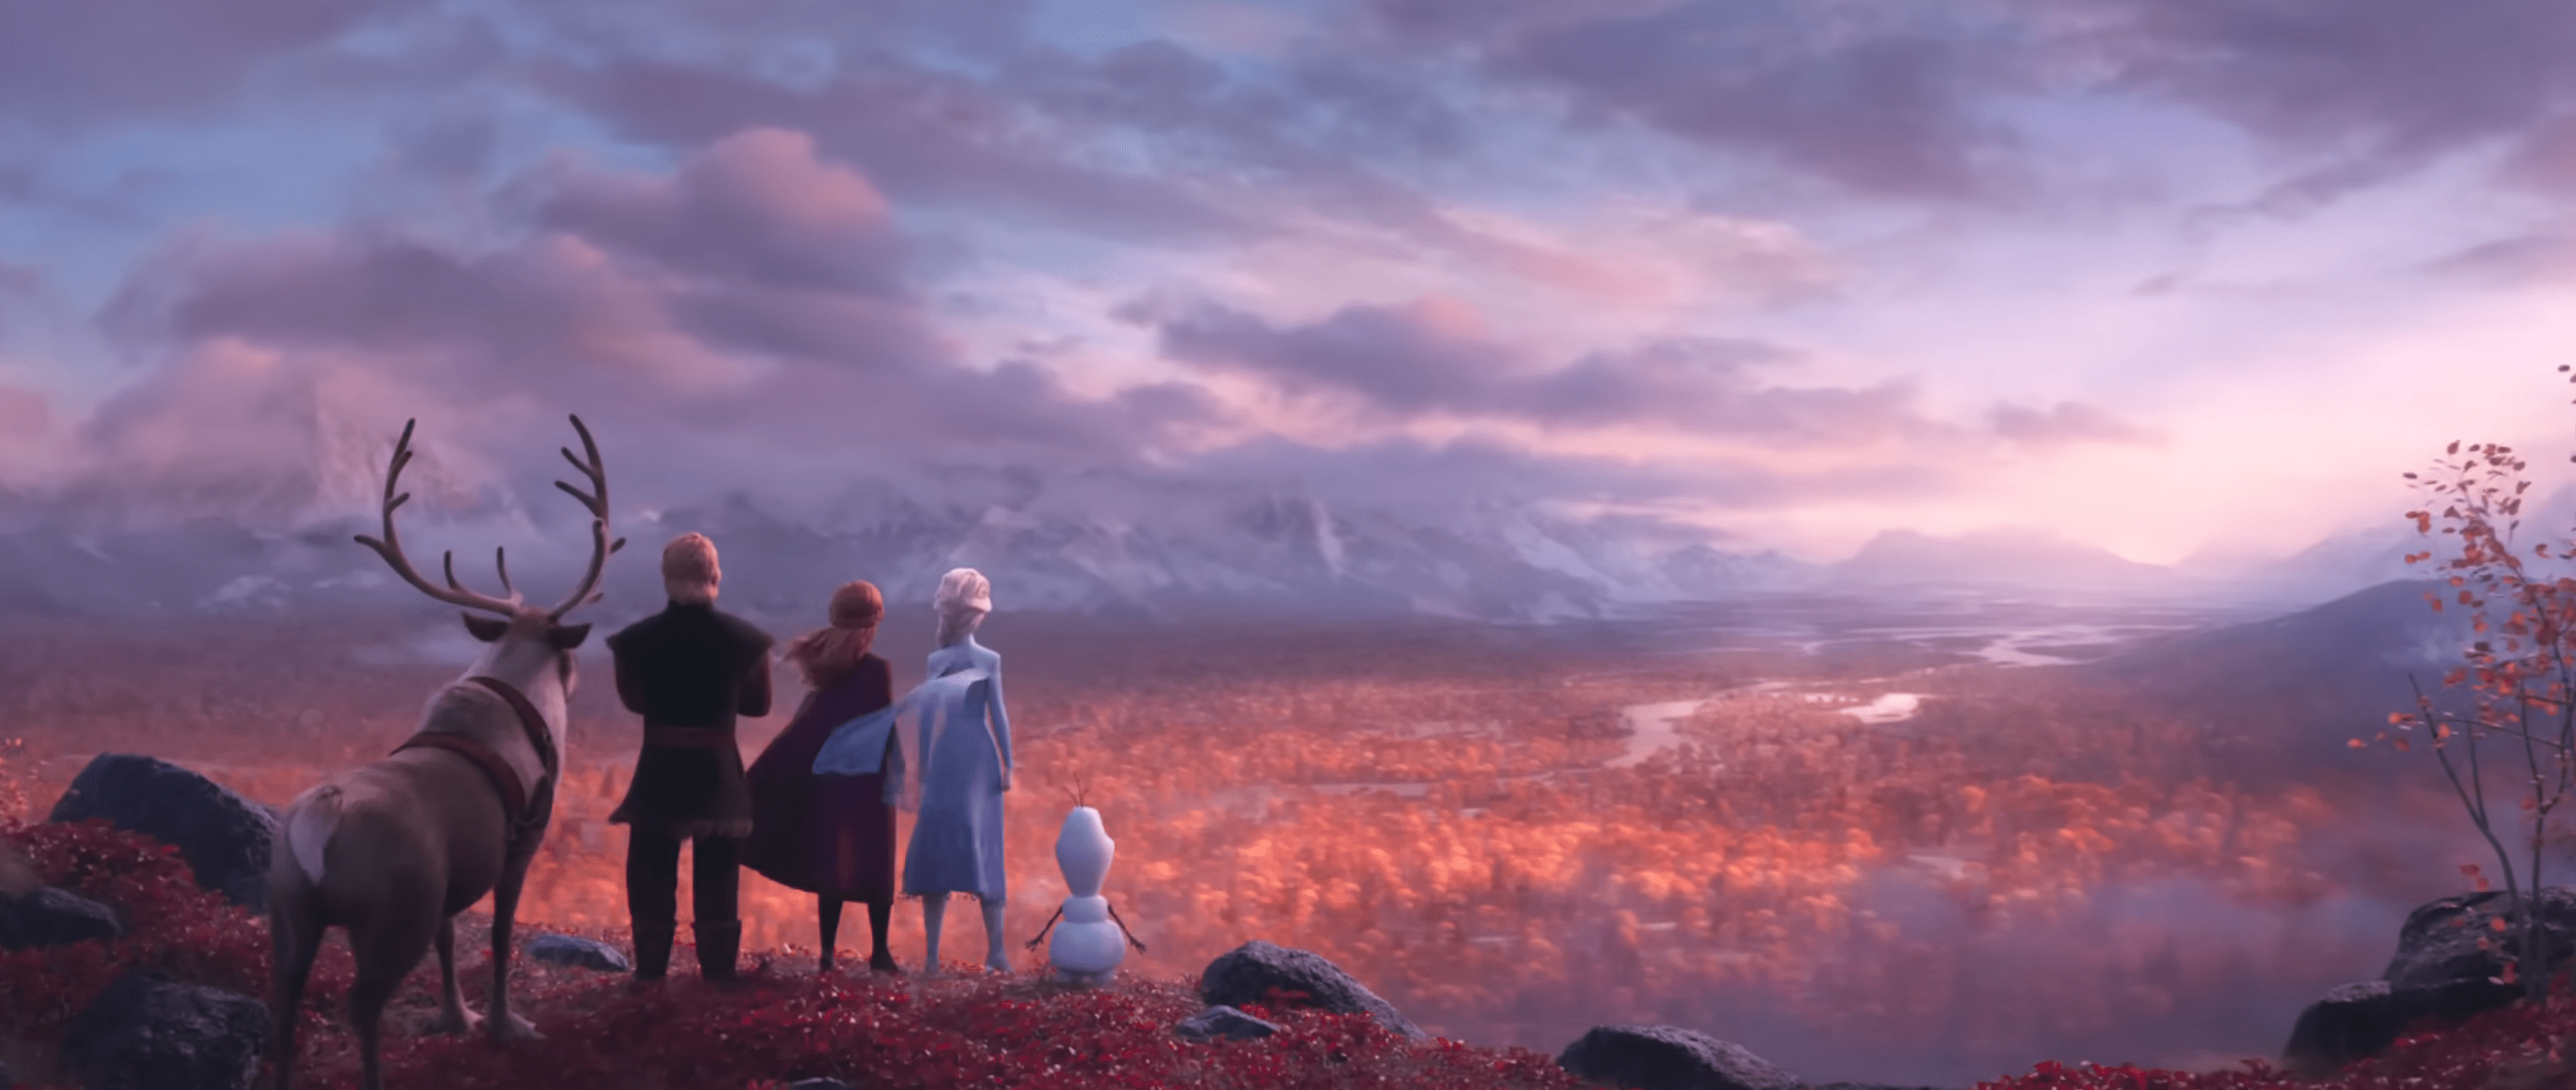 Frozen 4' is happening according to Bob Iger